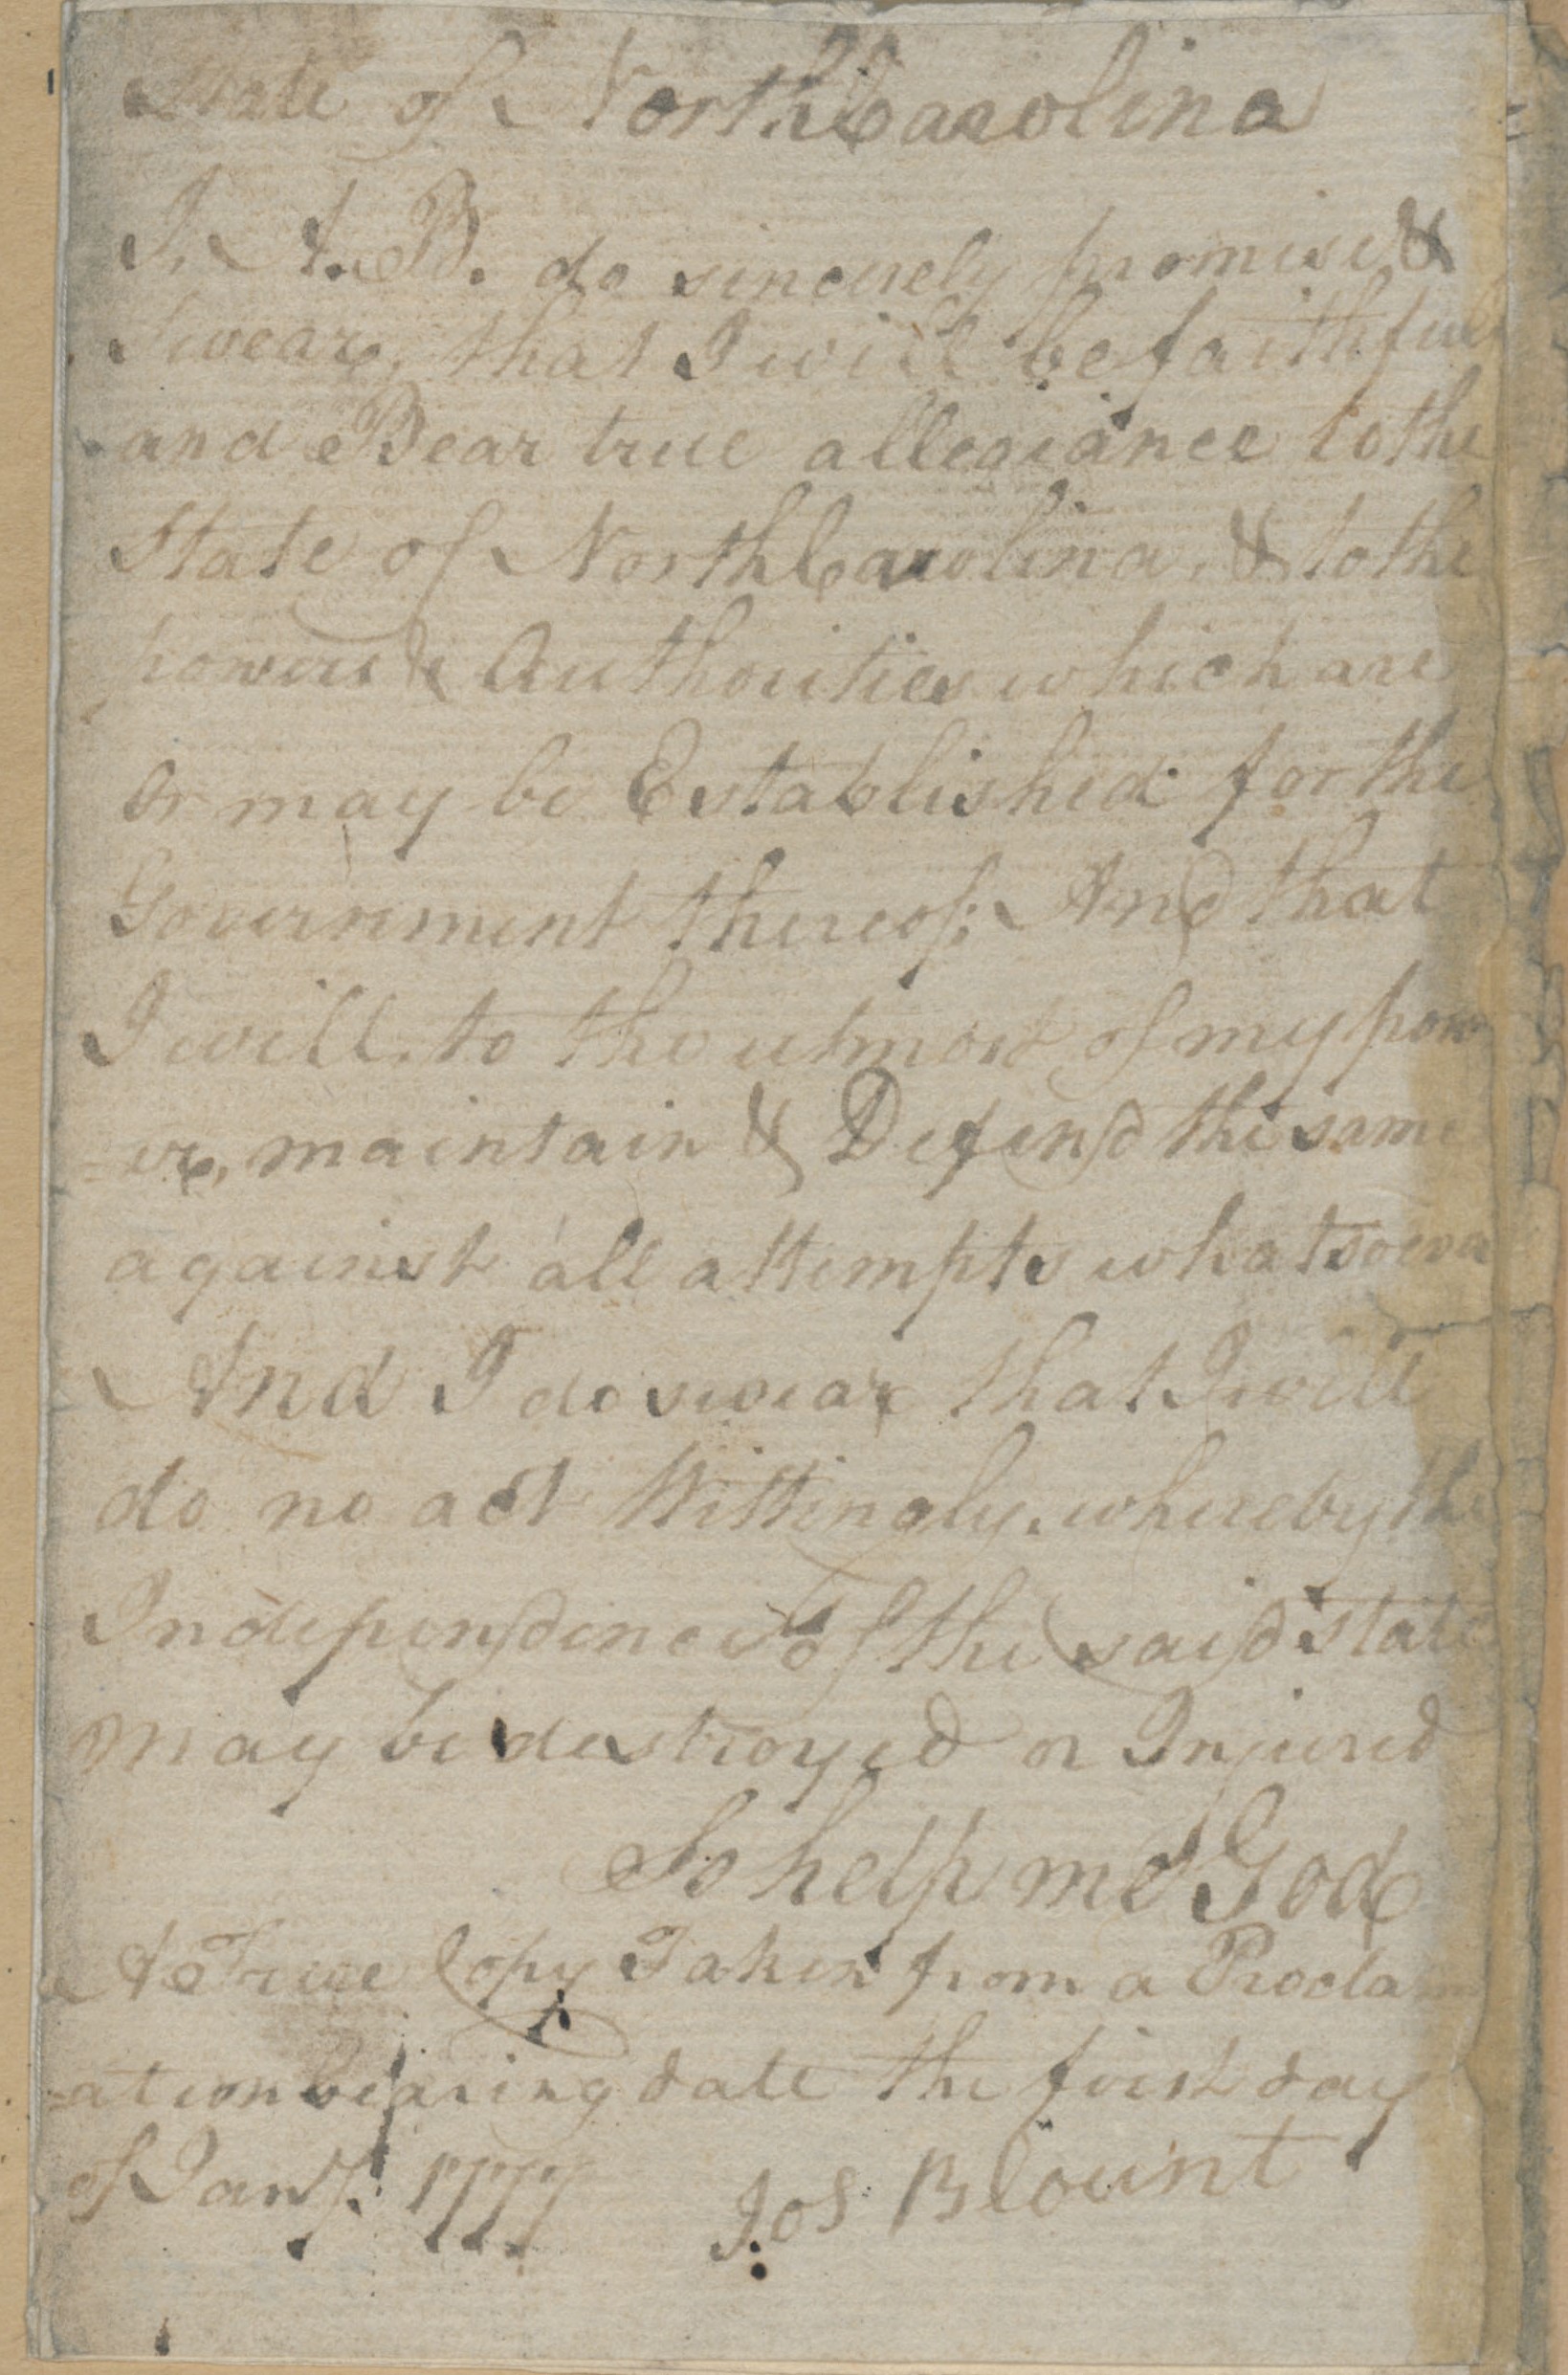 Oath of Allegiance to the State of North Carolina from Joseph Blount, 1 January 1777